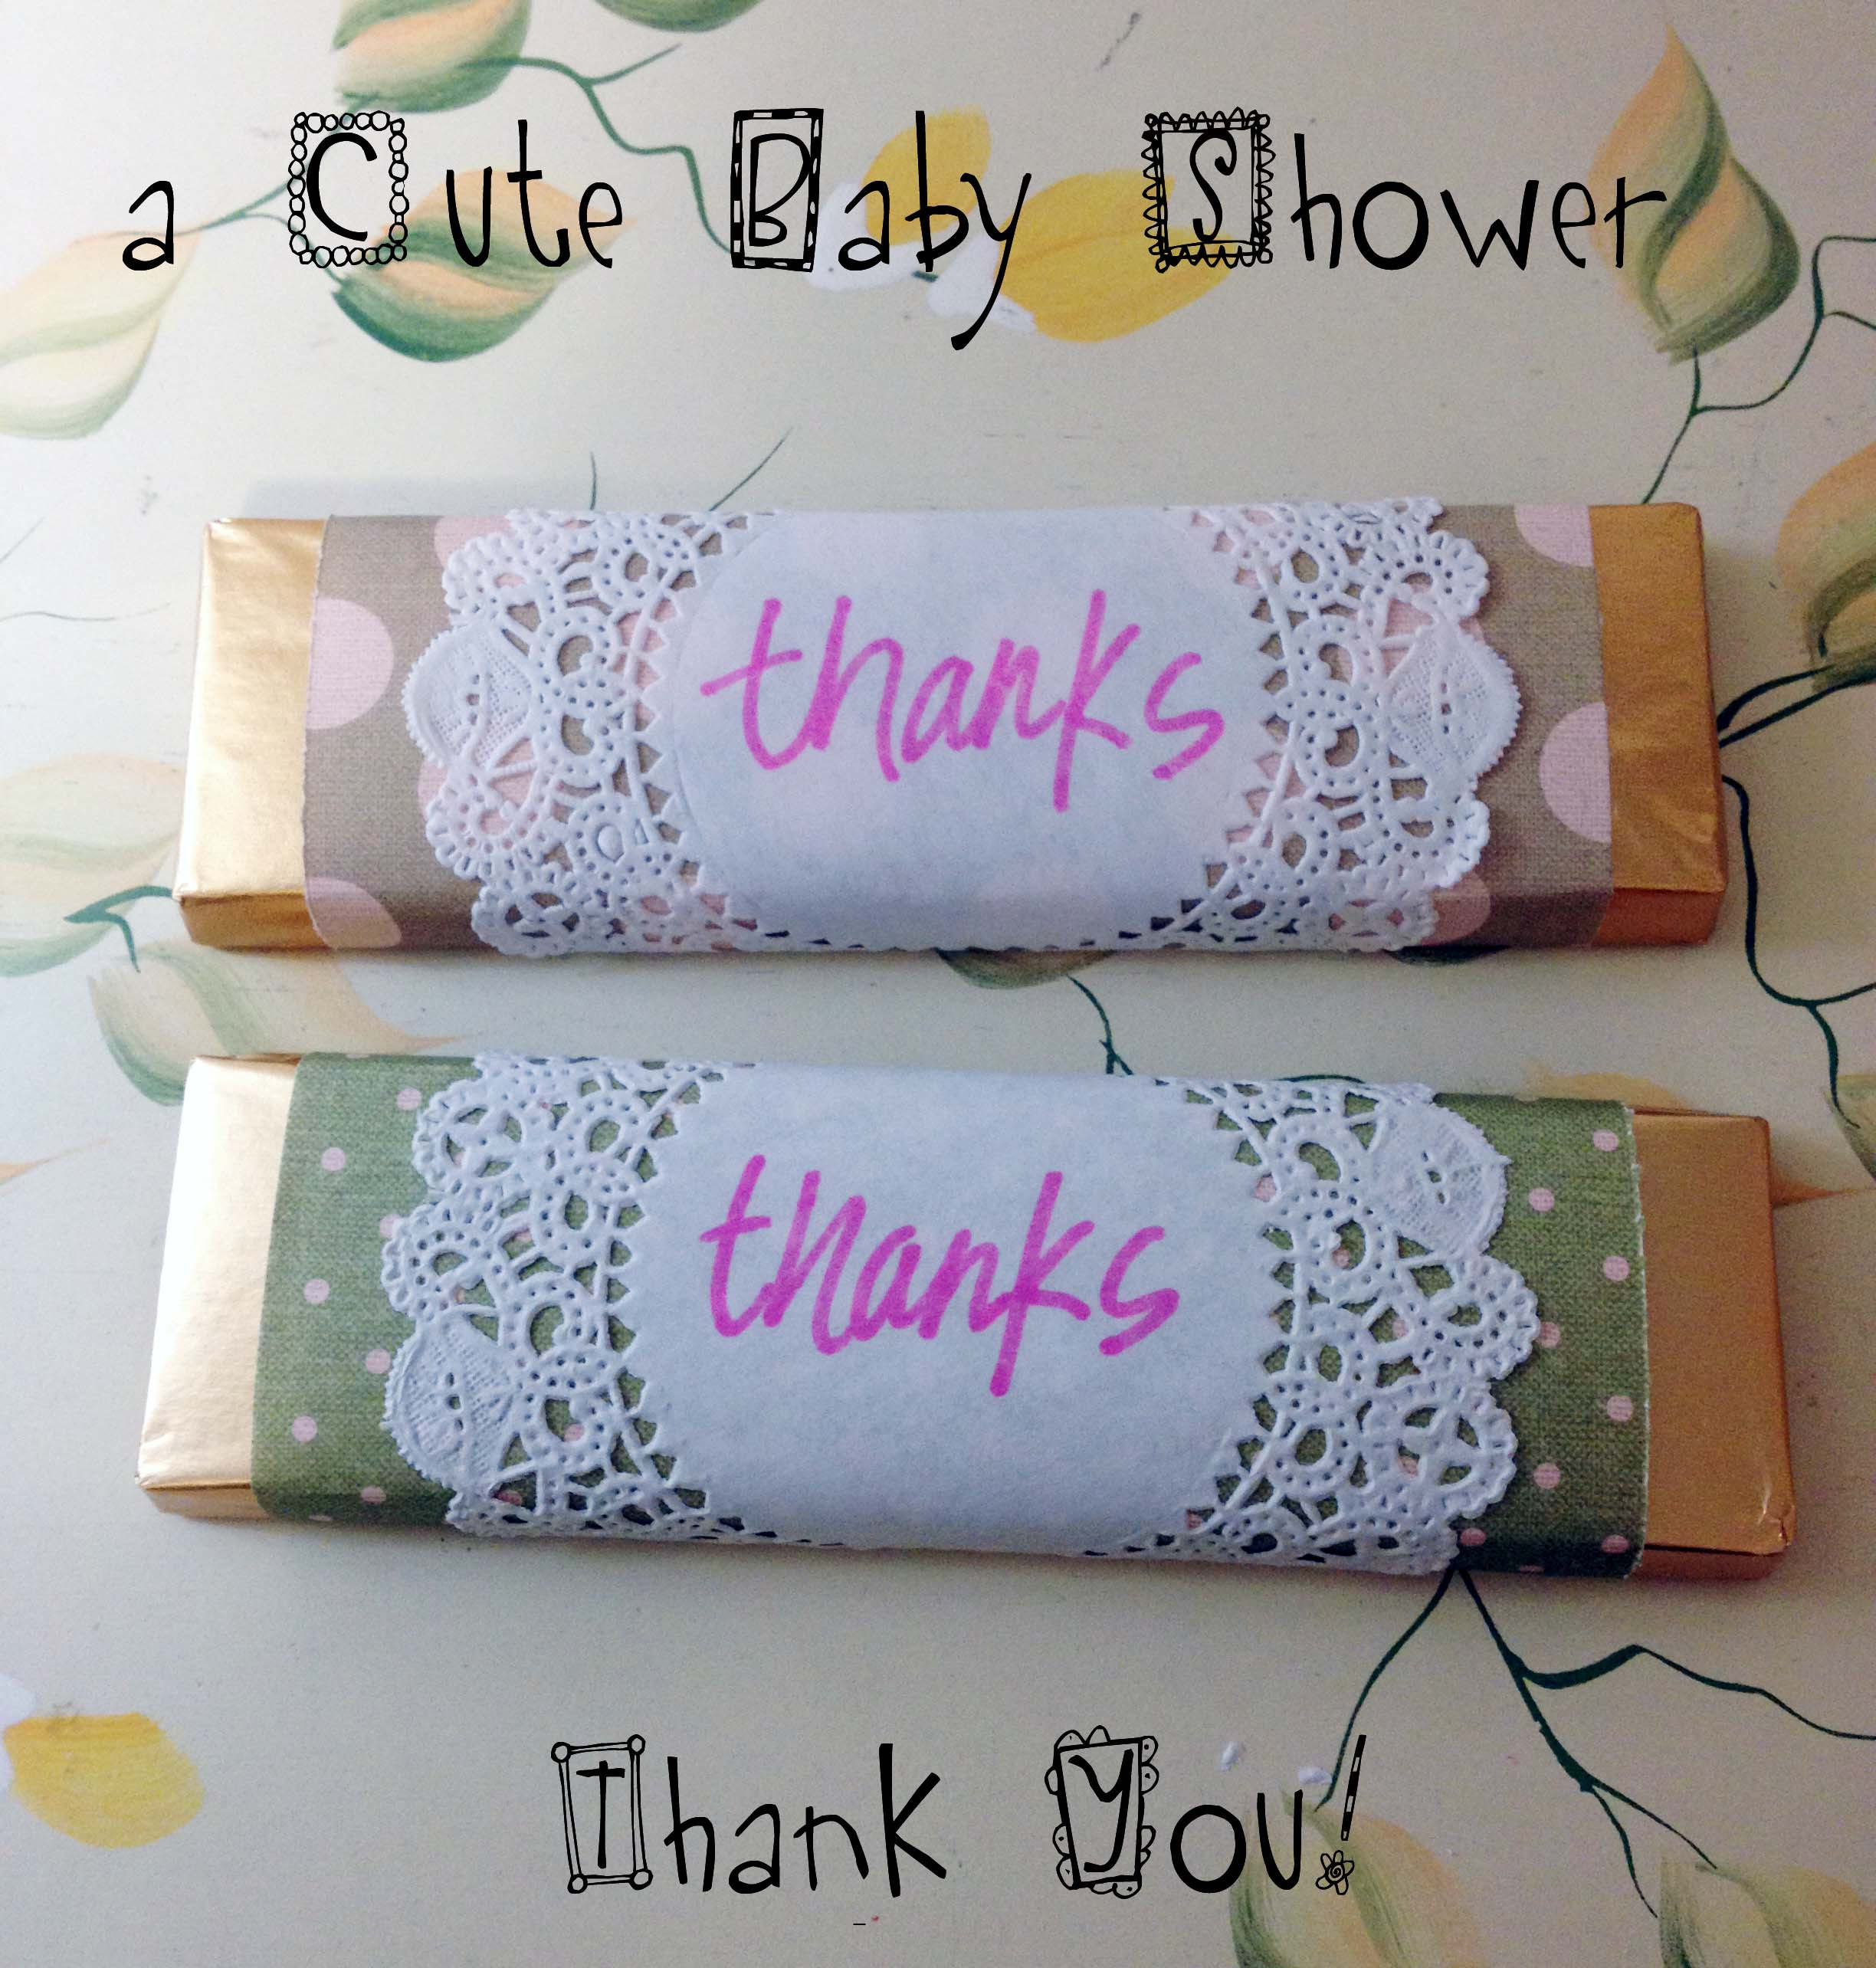 Thank You Gift Ideas For Baby Shower
 Diy A Cute Baby Image